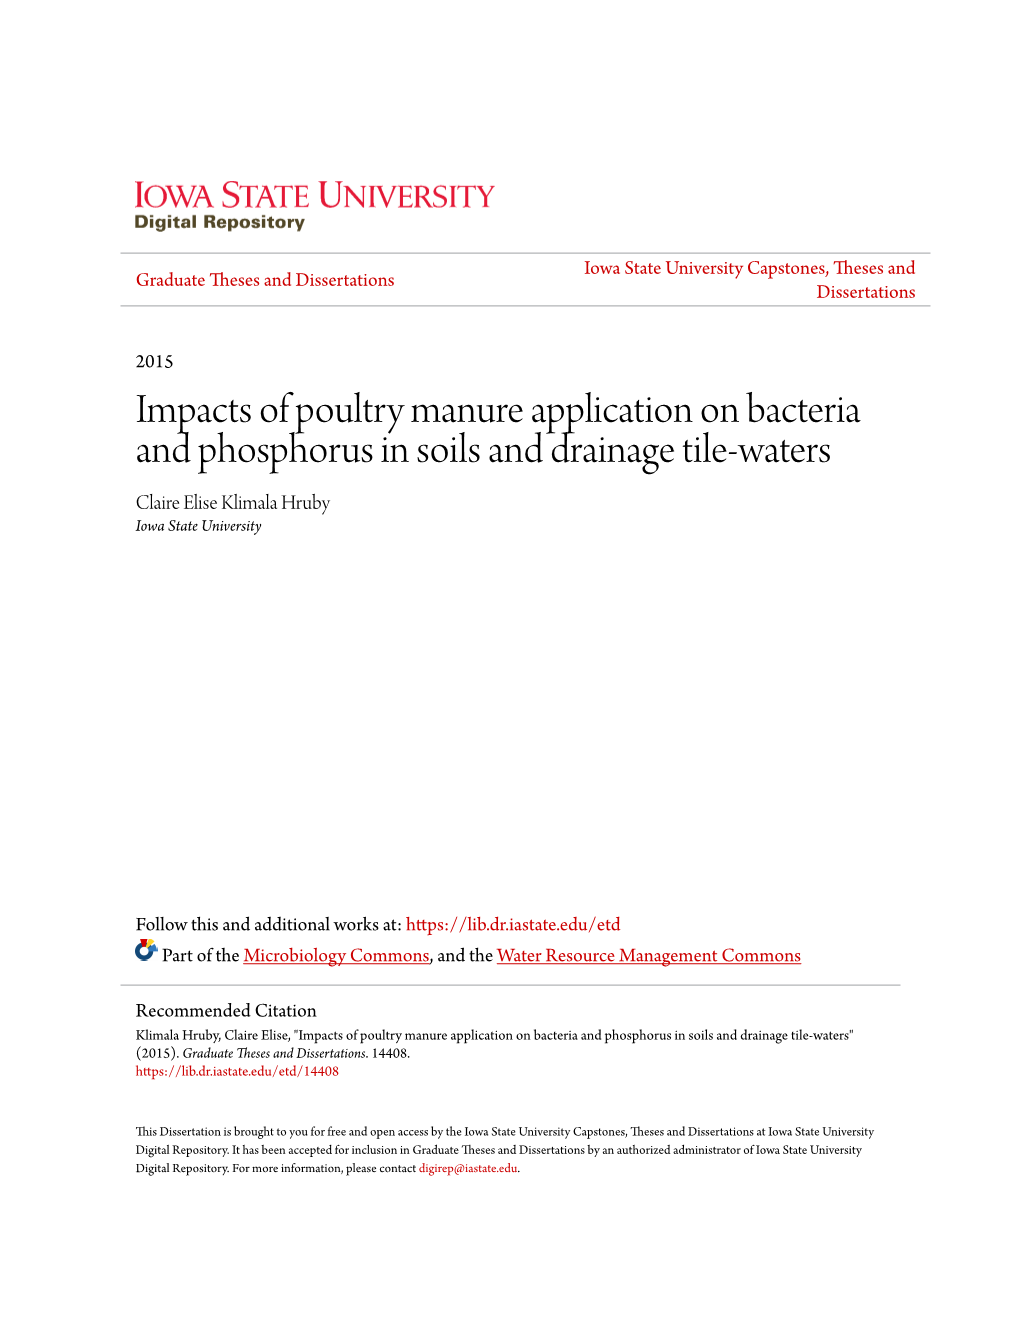 Impacts of Poultry Manure Application on Bacteria and Phosphorus in Soils and Drainage Tile-Waters Claire Elise Klimala Hruby Iowa State University